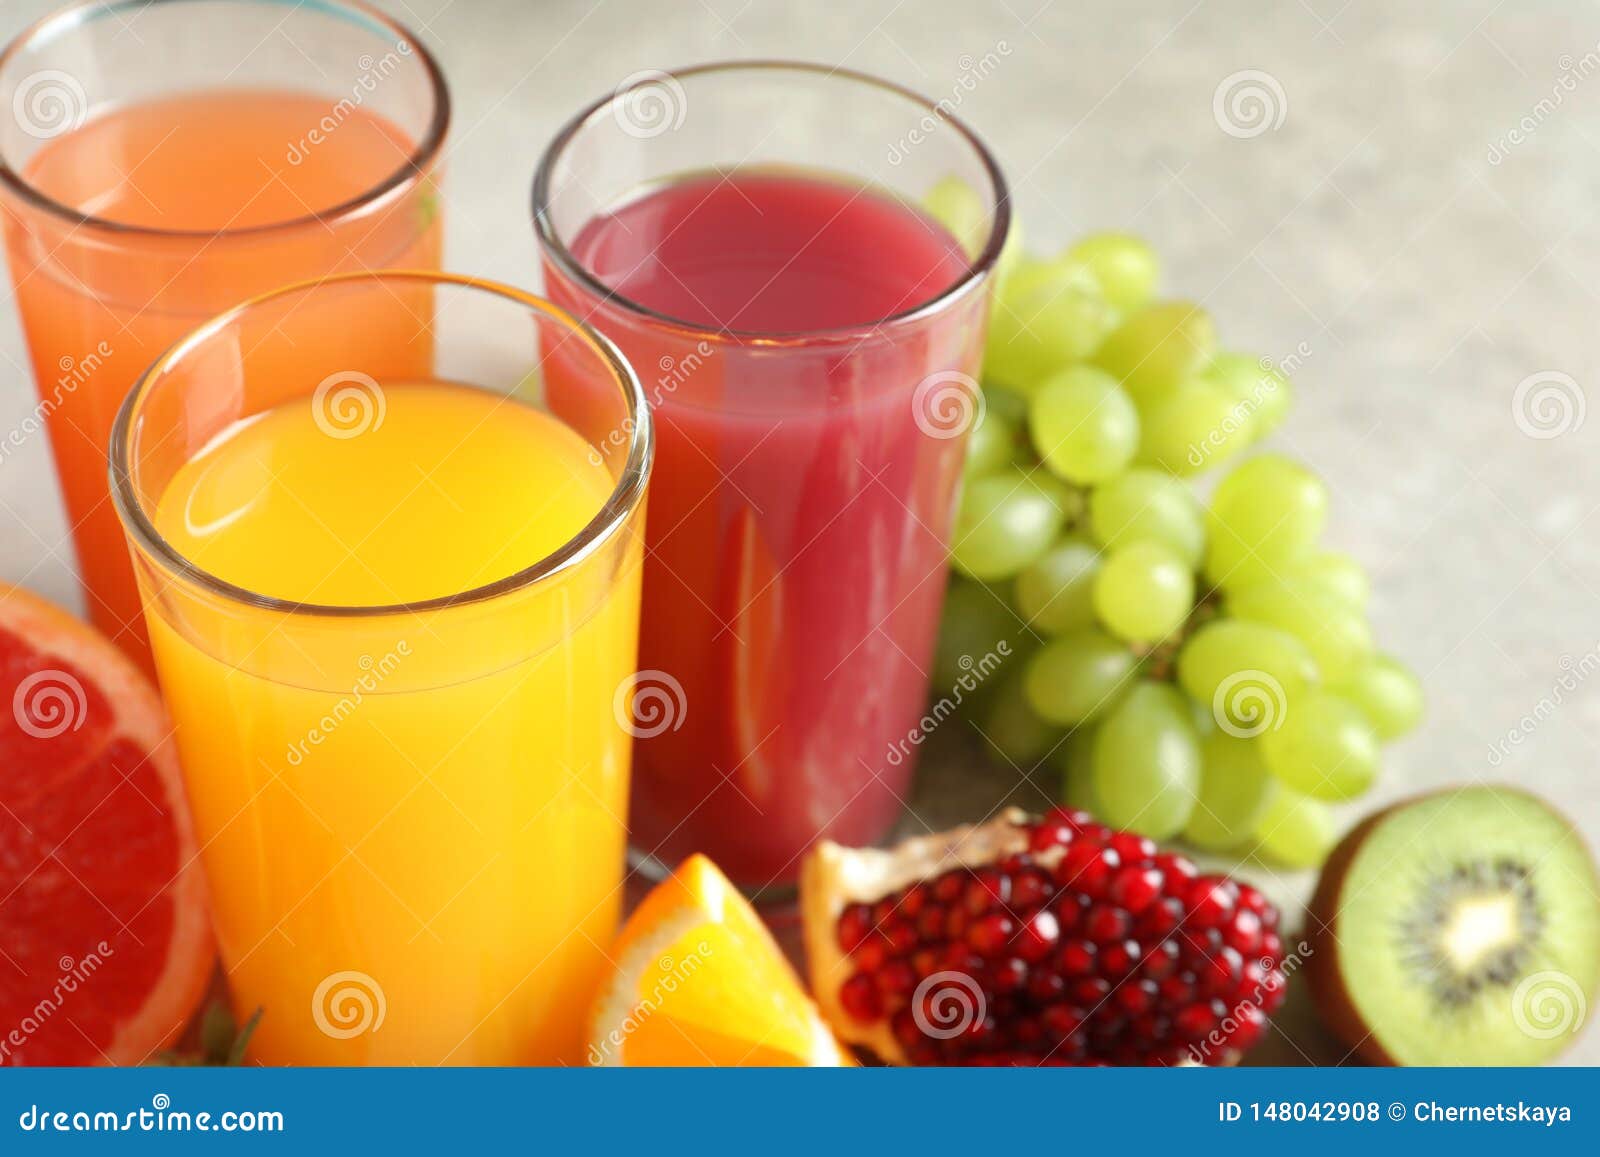 https://thumbs.dreamstime.com/z/three-glasses-different-juices-fresh-fruits-table-148042908.jpg